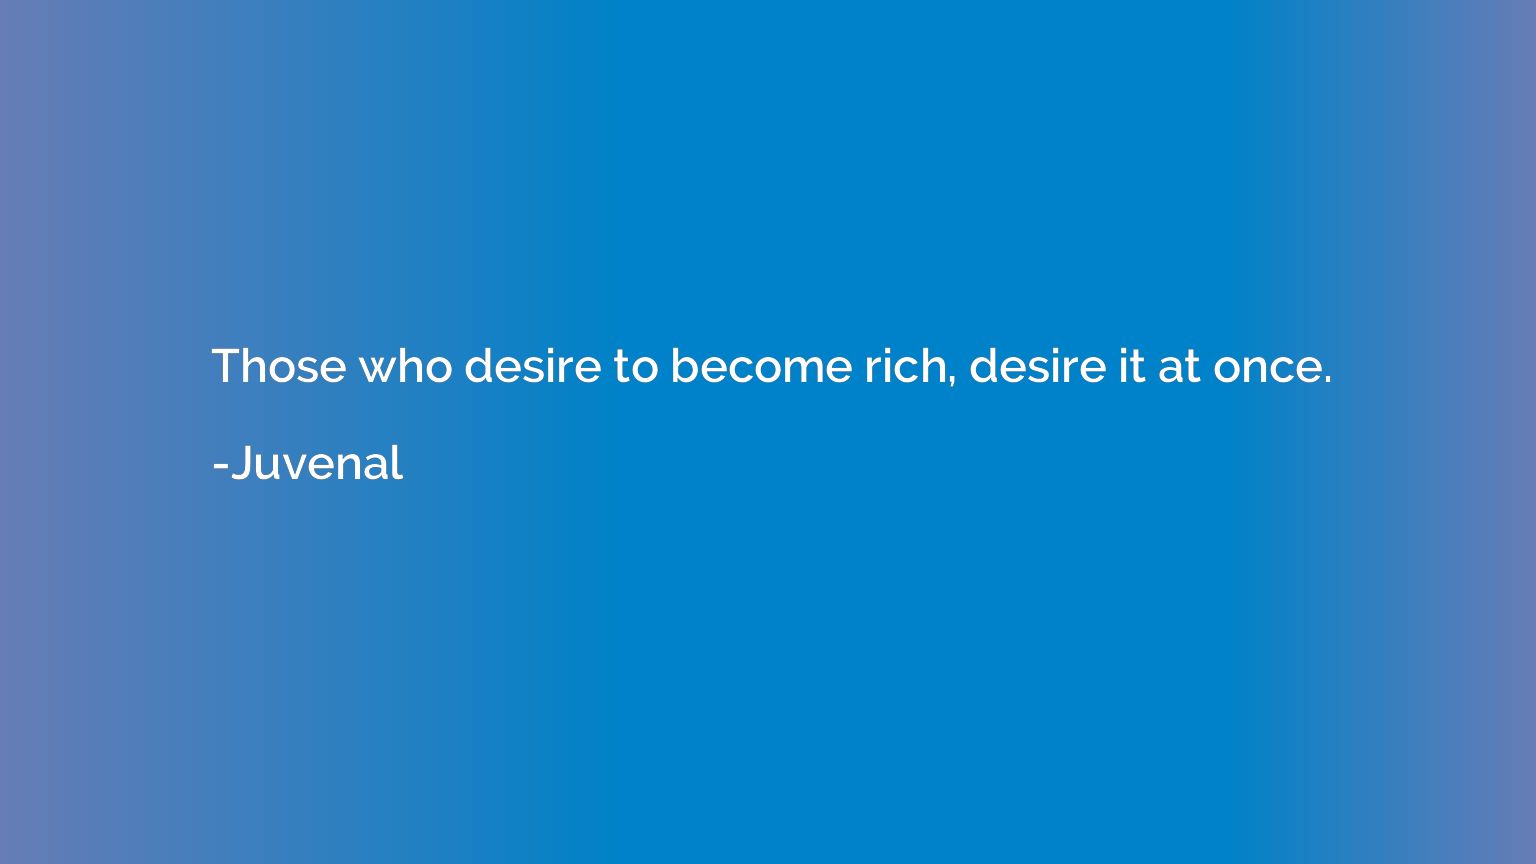 Those who desire to become rich, desire it at once.